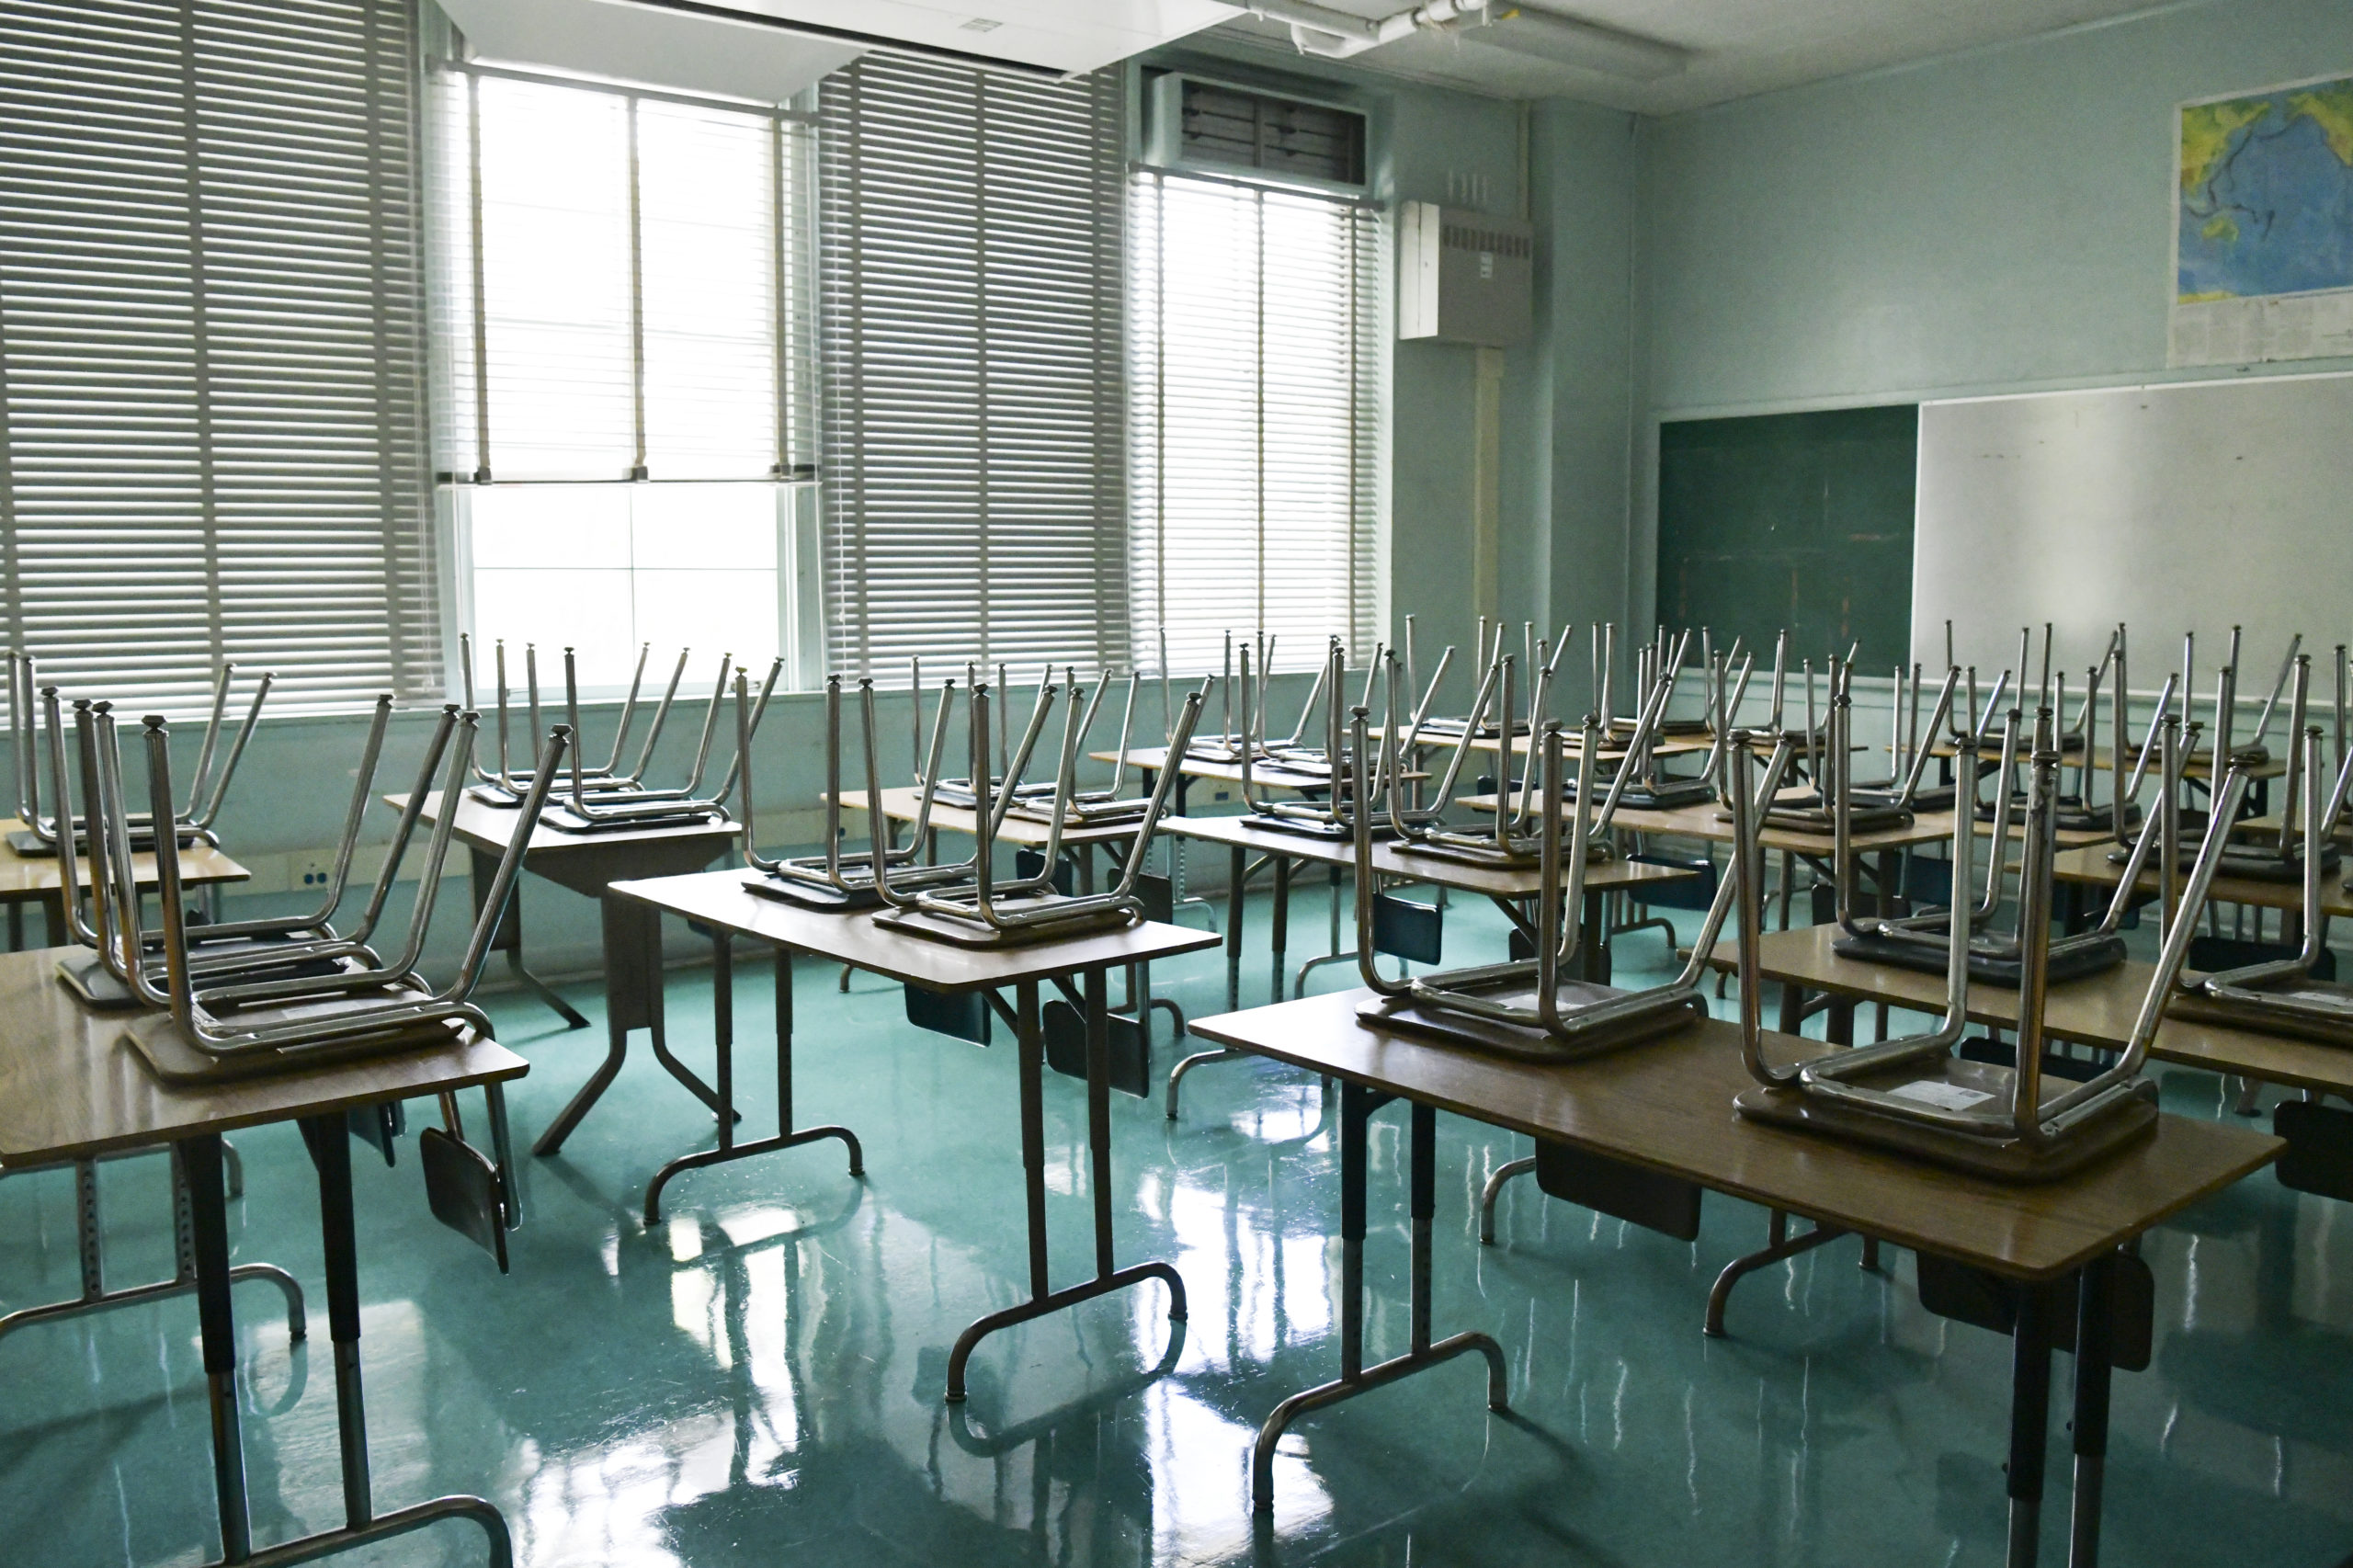 An empty classroom is seen at Hollywood High School on August 13, 2020 in Hollywood, California. (Photo by Rodin Eckenroth/Getty Images)